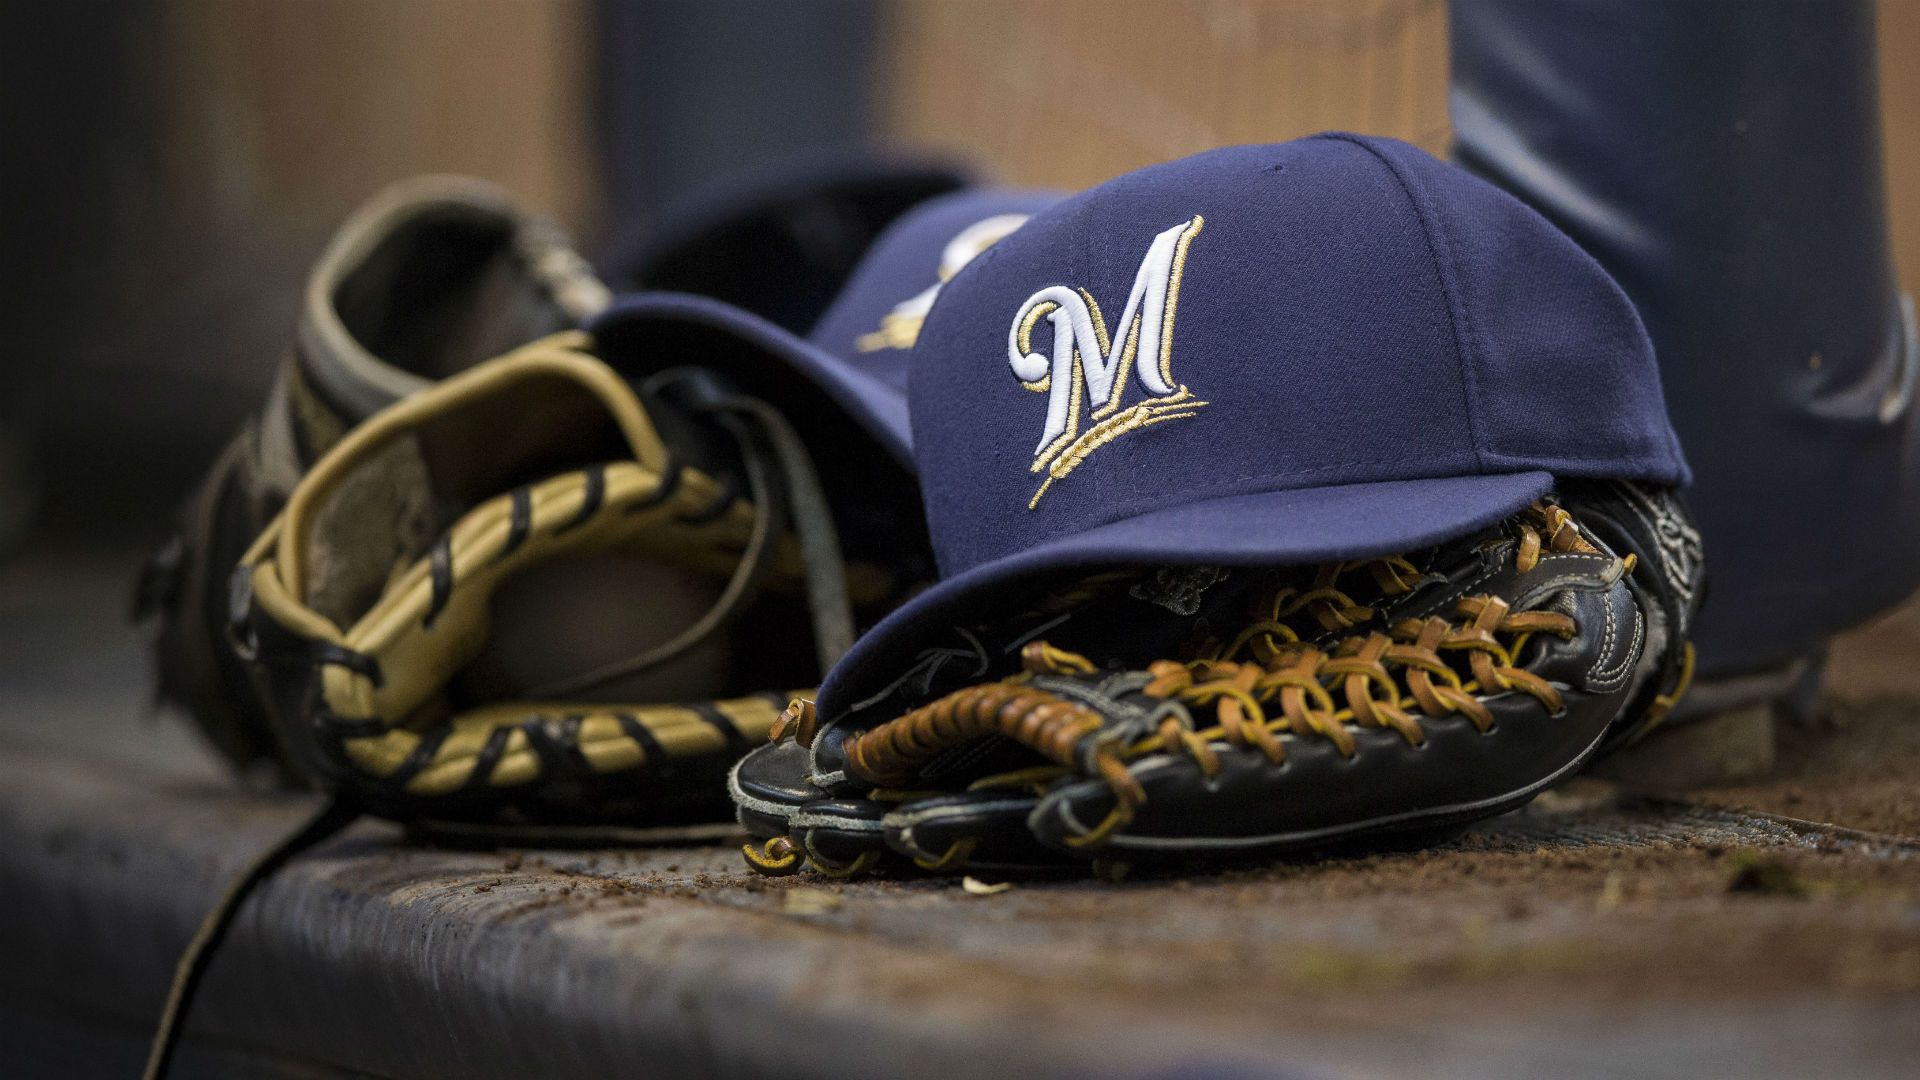 Watch: Brewers video recreates scene from 'The Sandlot'